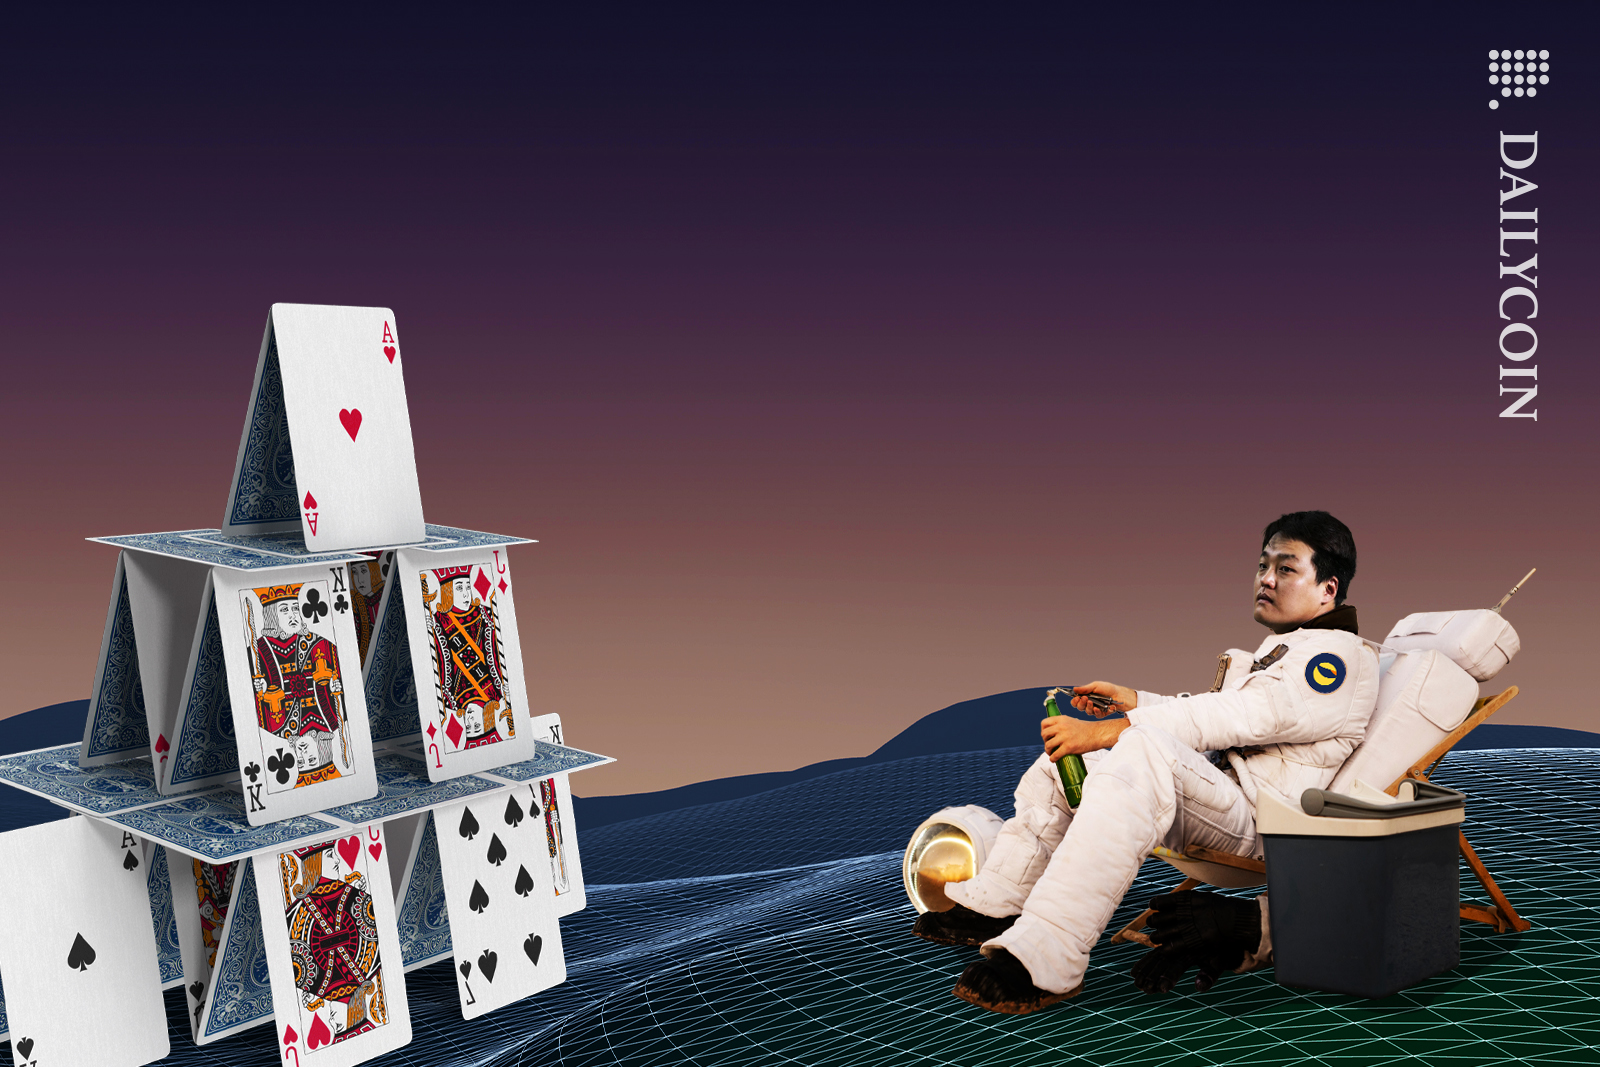 Do Kwon about to open a beer, sitting on a digital land with a house made of cards. But then he sees someone.